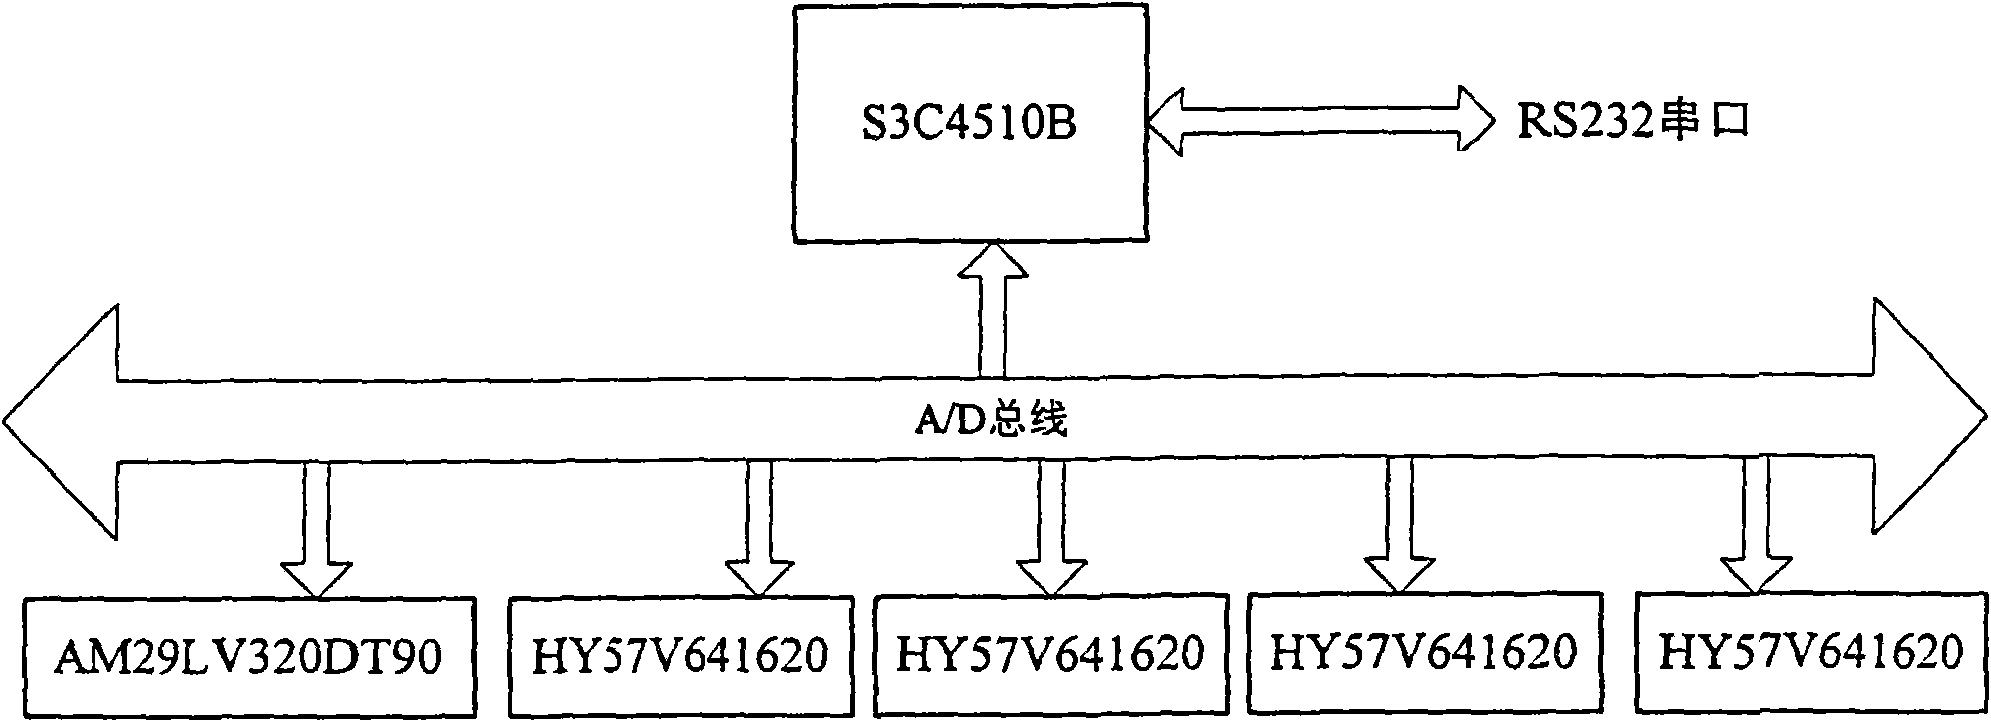 Device and method for testing connectivity of 63-path bridge service channel in STM-1